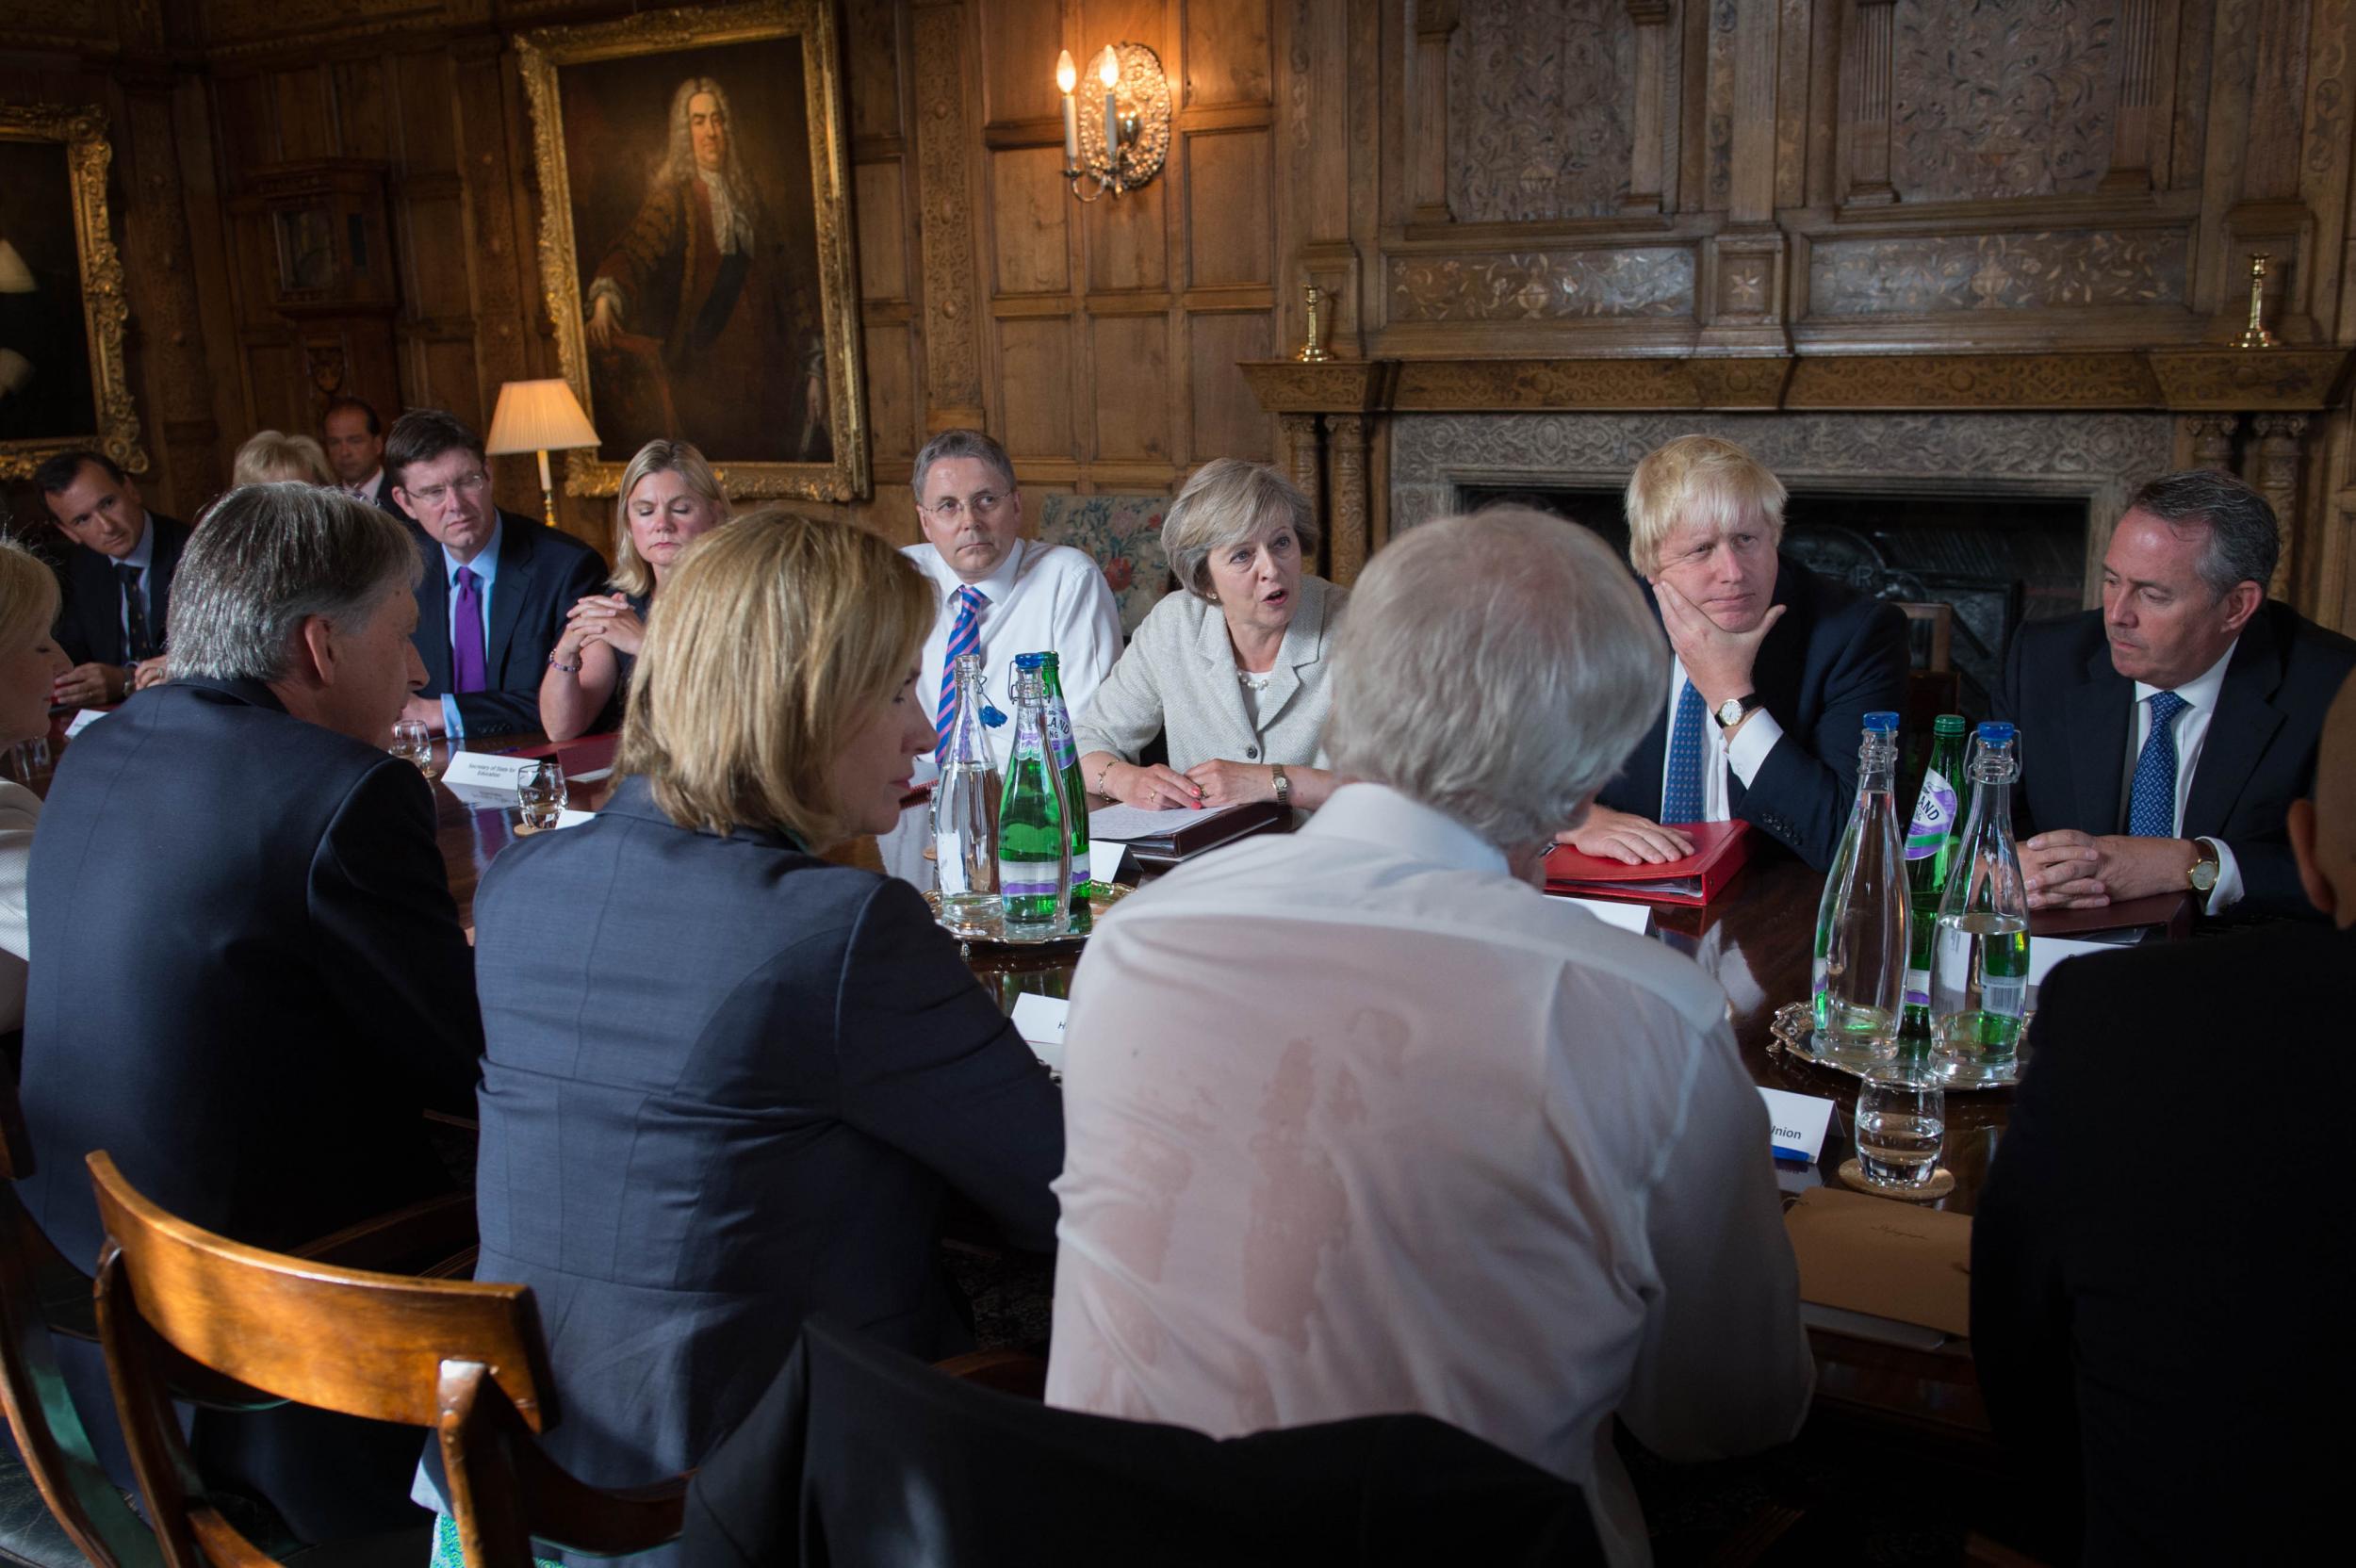 The Brexit summit at Chequers set the scene for the first of many important and hard-fought confrontations between the executive and the legislature